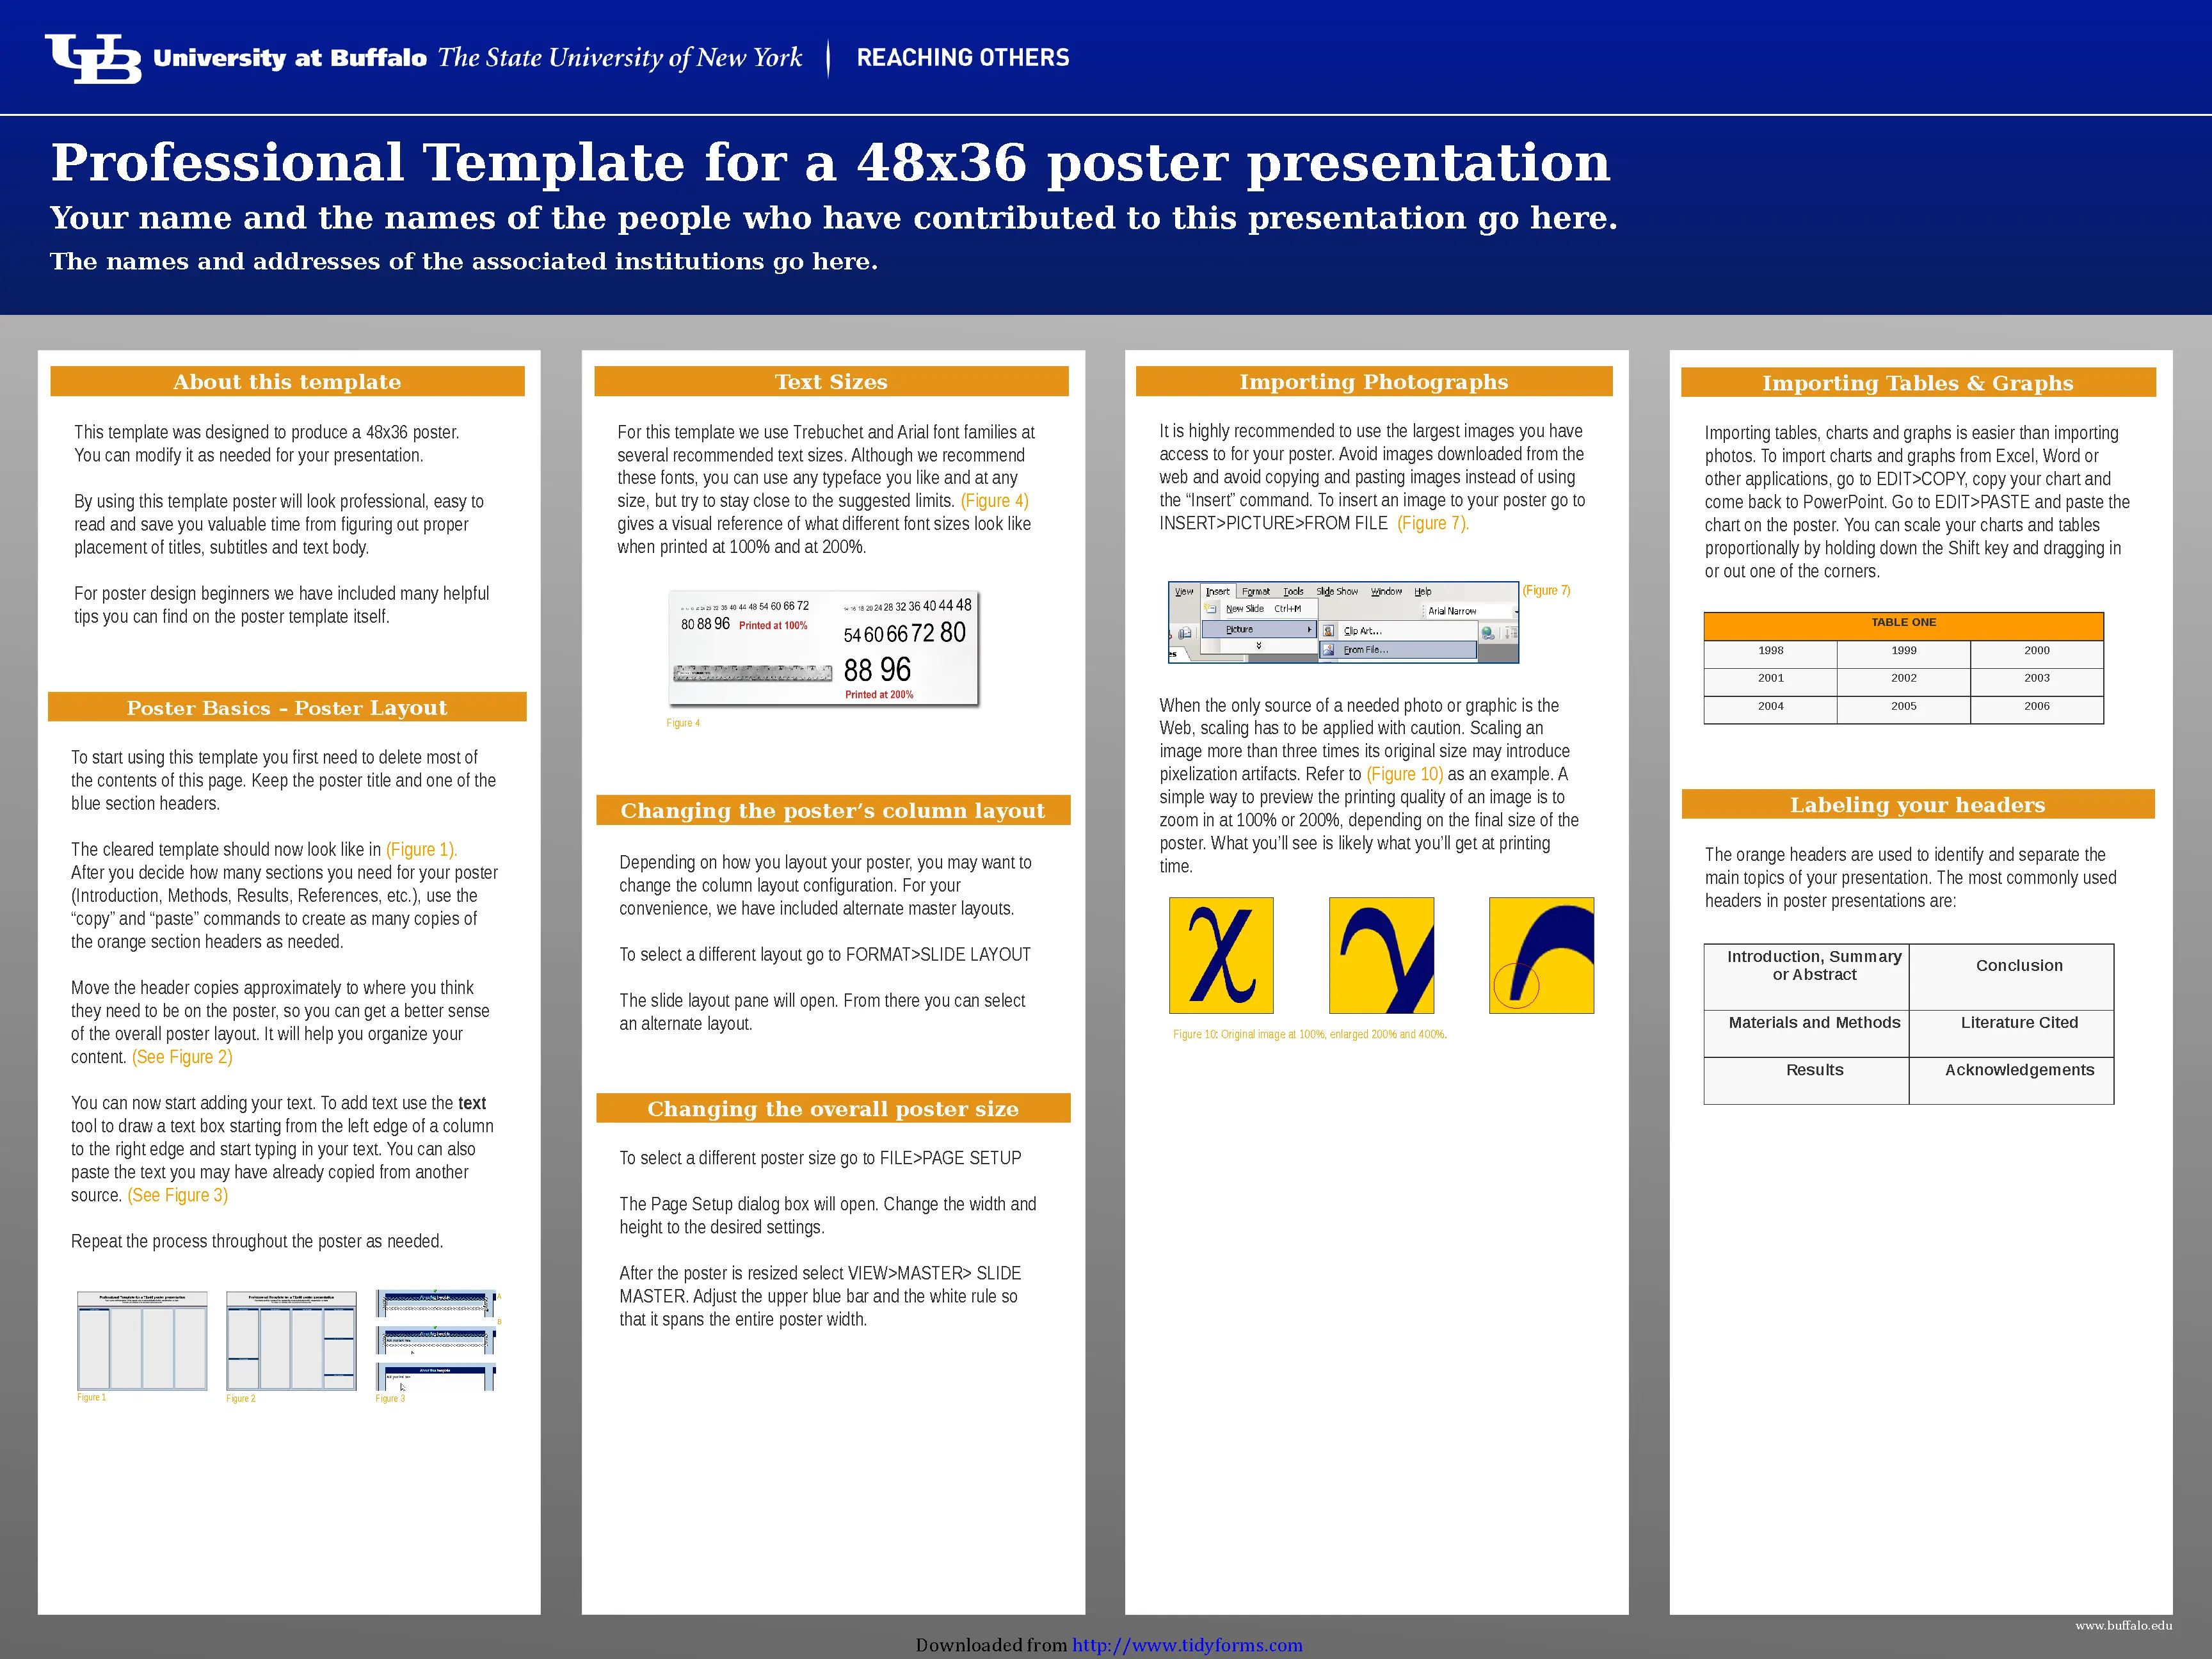 Research Poster Template 1 48 36